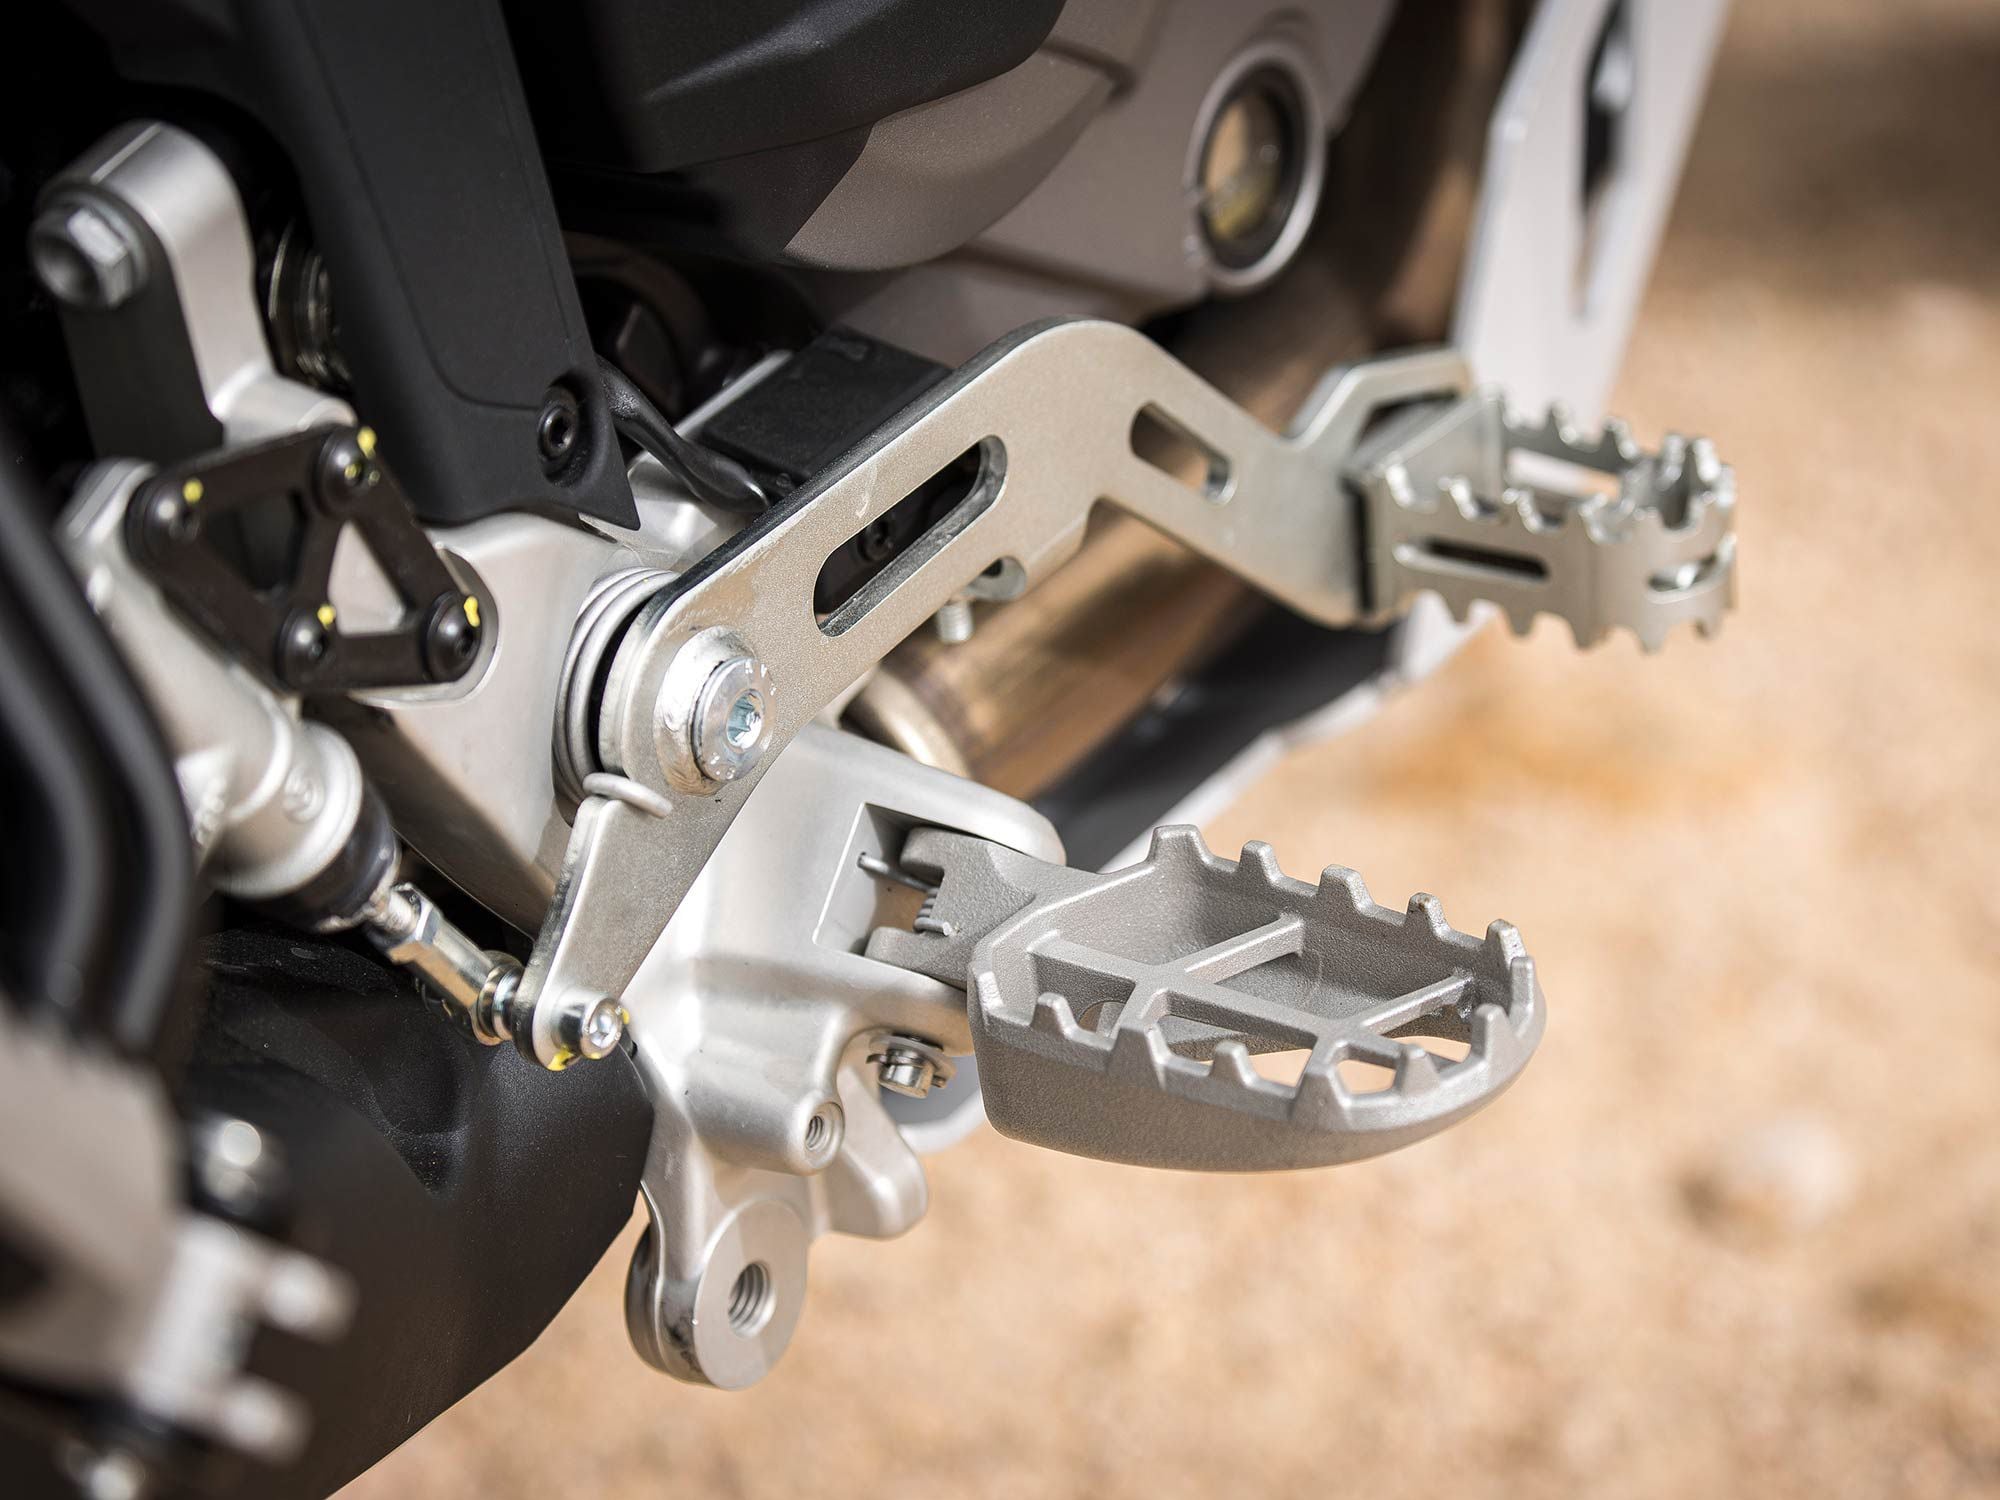 More signs of Ducati’s serious off-road intent. The DesertX’s footpegs are seriously aggressive.